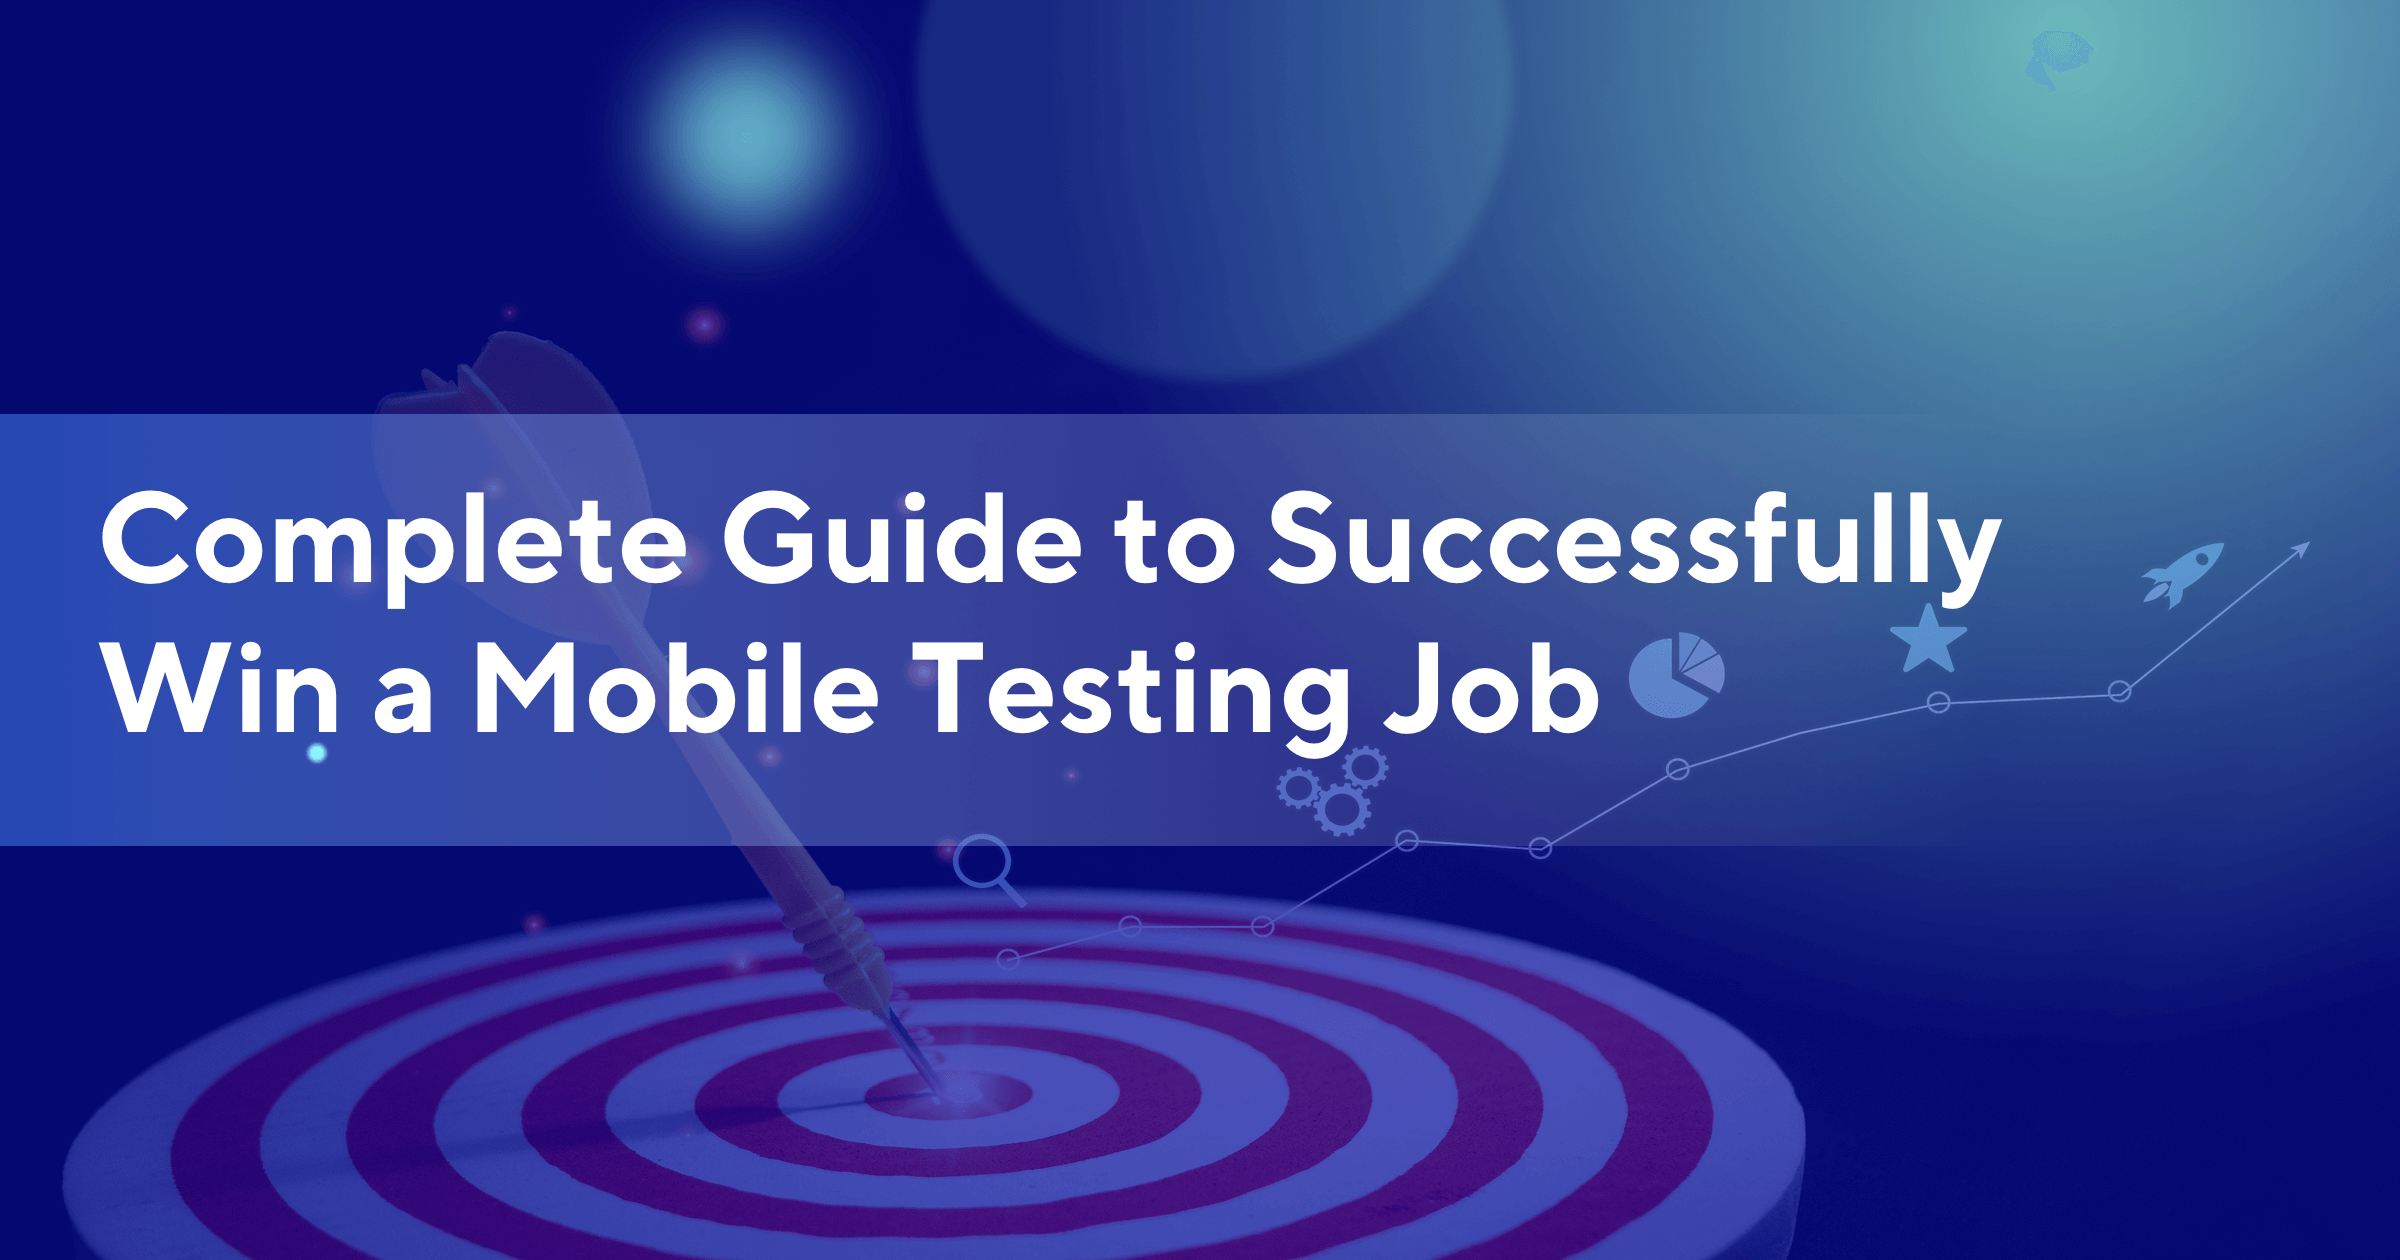 A Complete Guide to Successfully Win a Mobile Testing Job